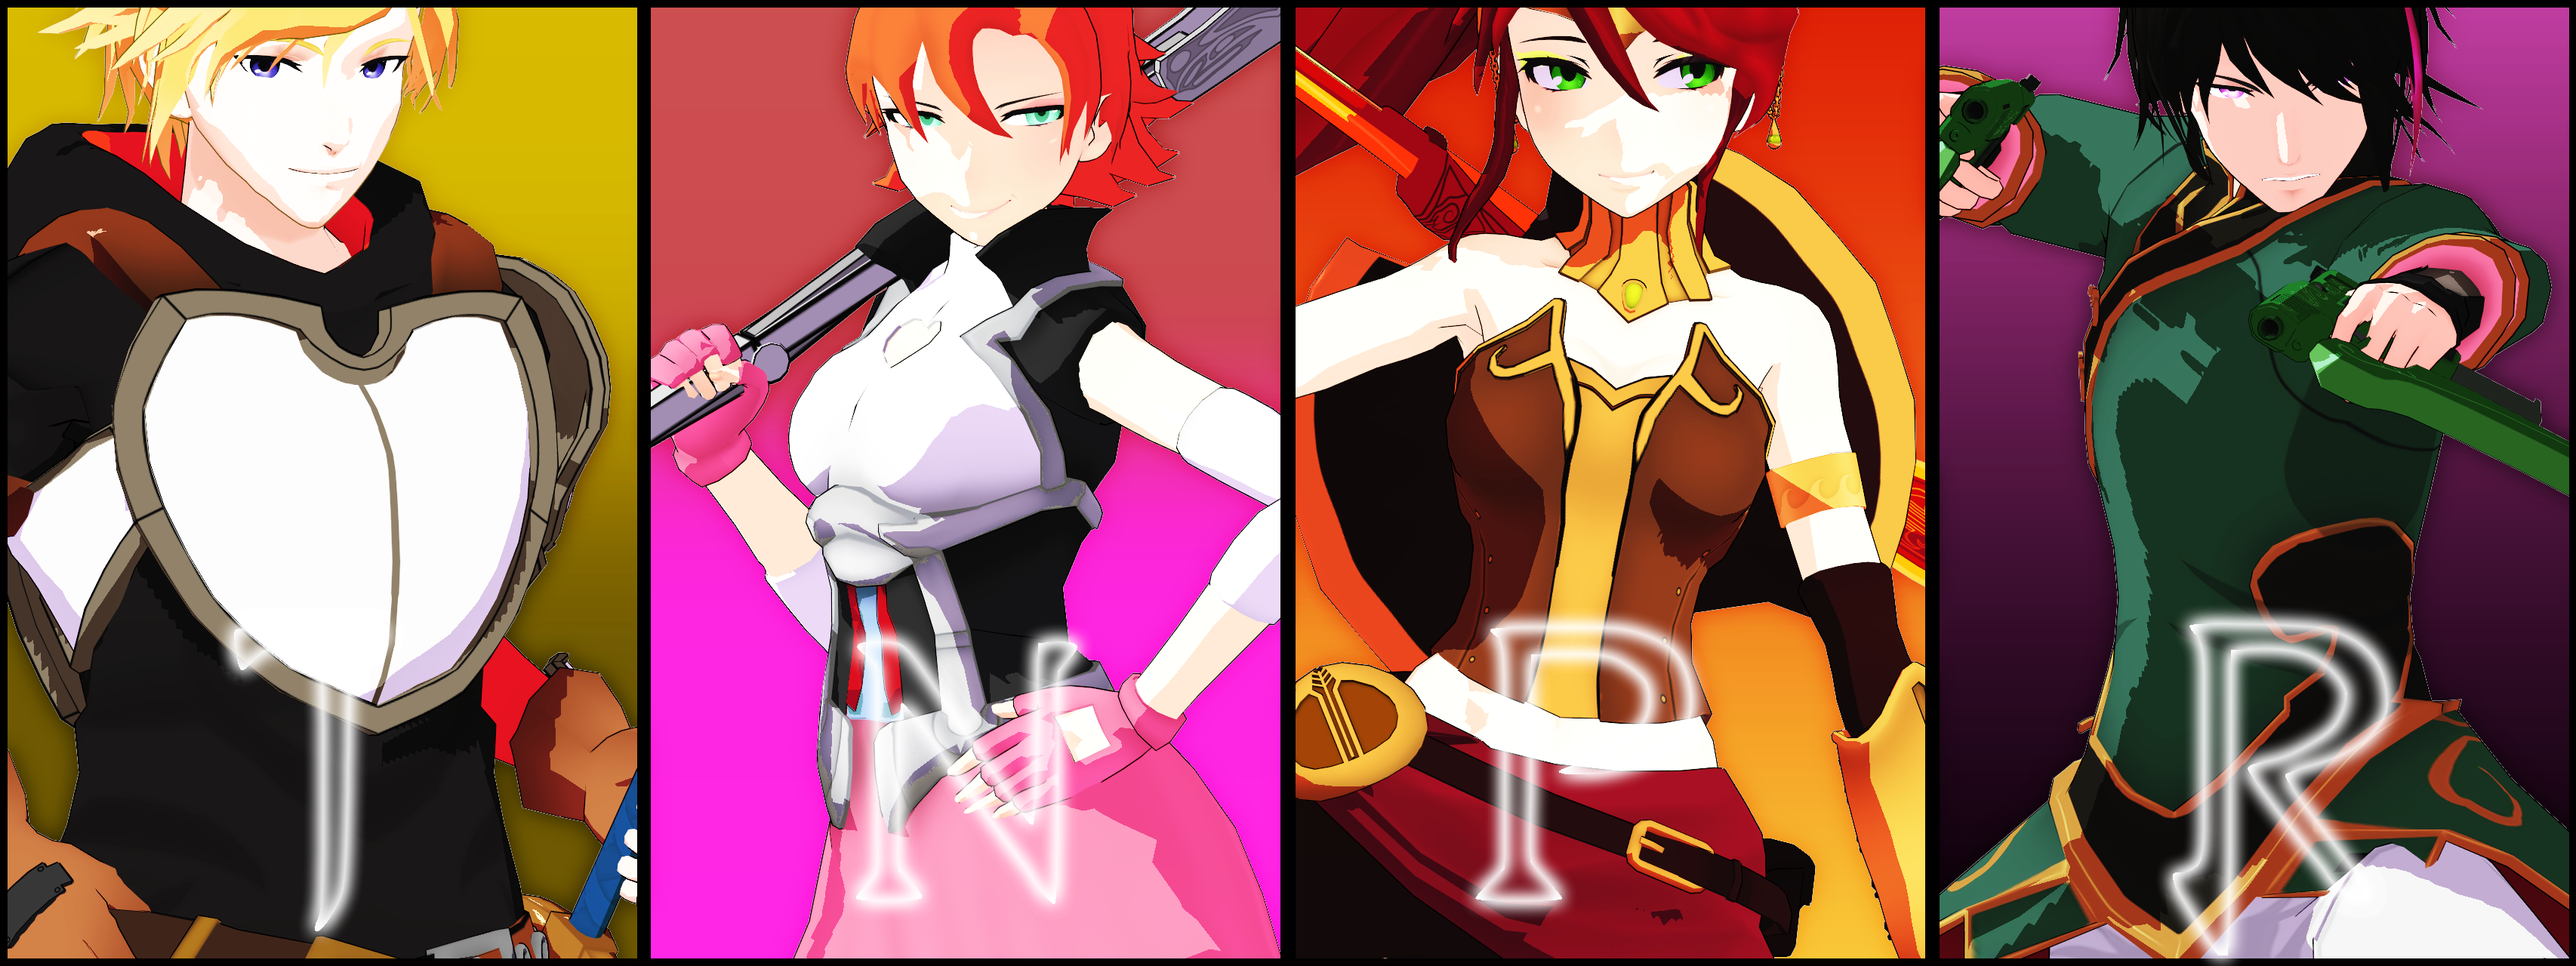 MMDxRWBY ] Team JNPR [ UPDATED // +DL!] by rxsilience on DeviantArt